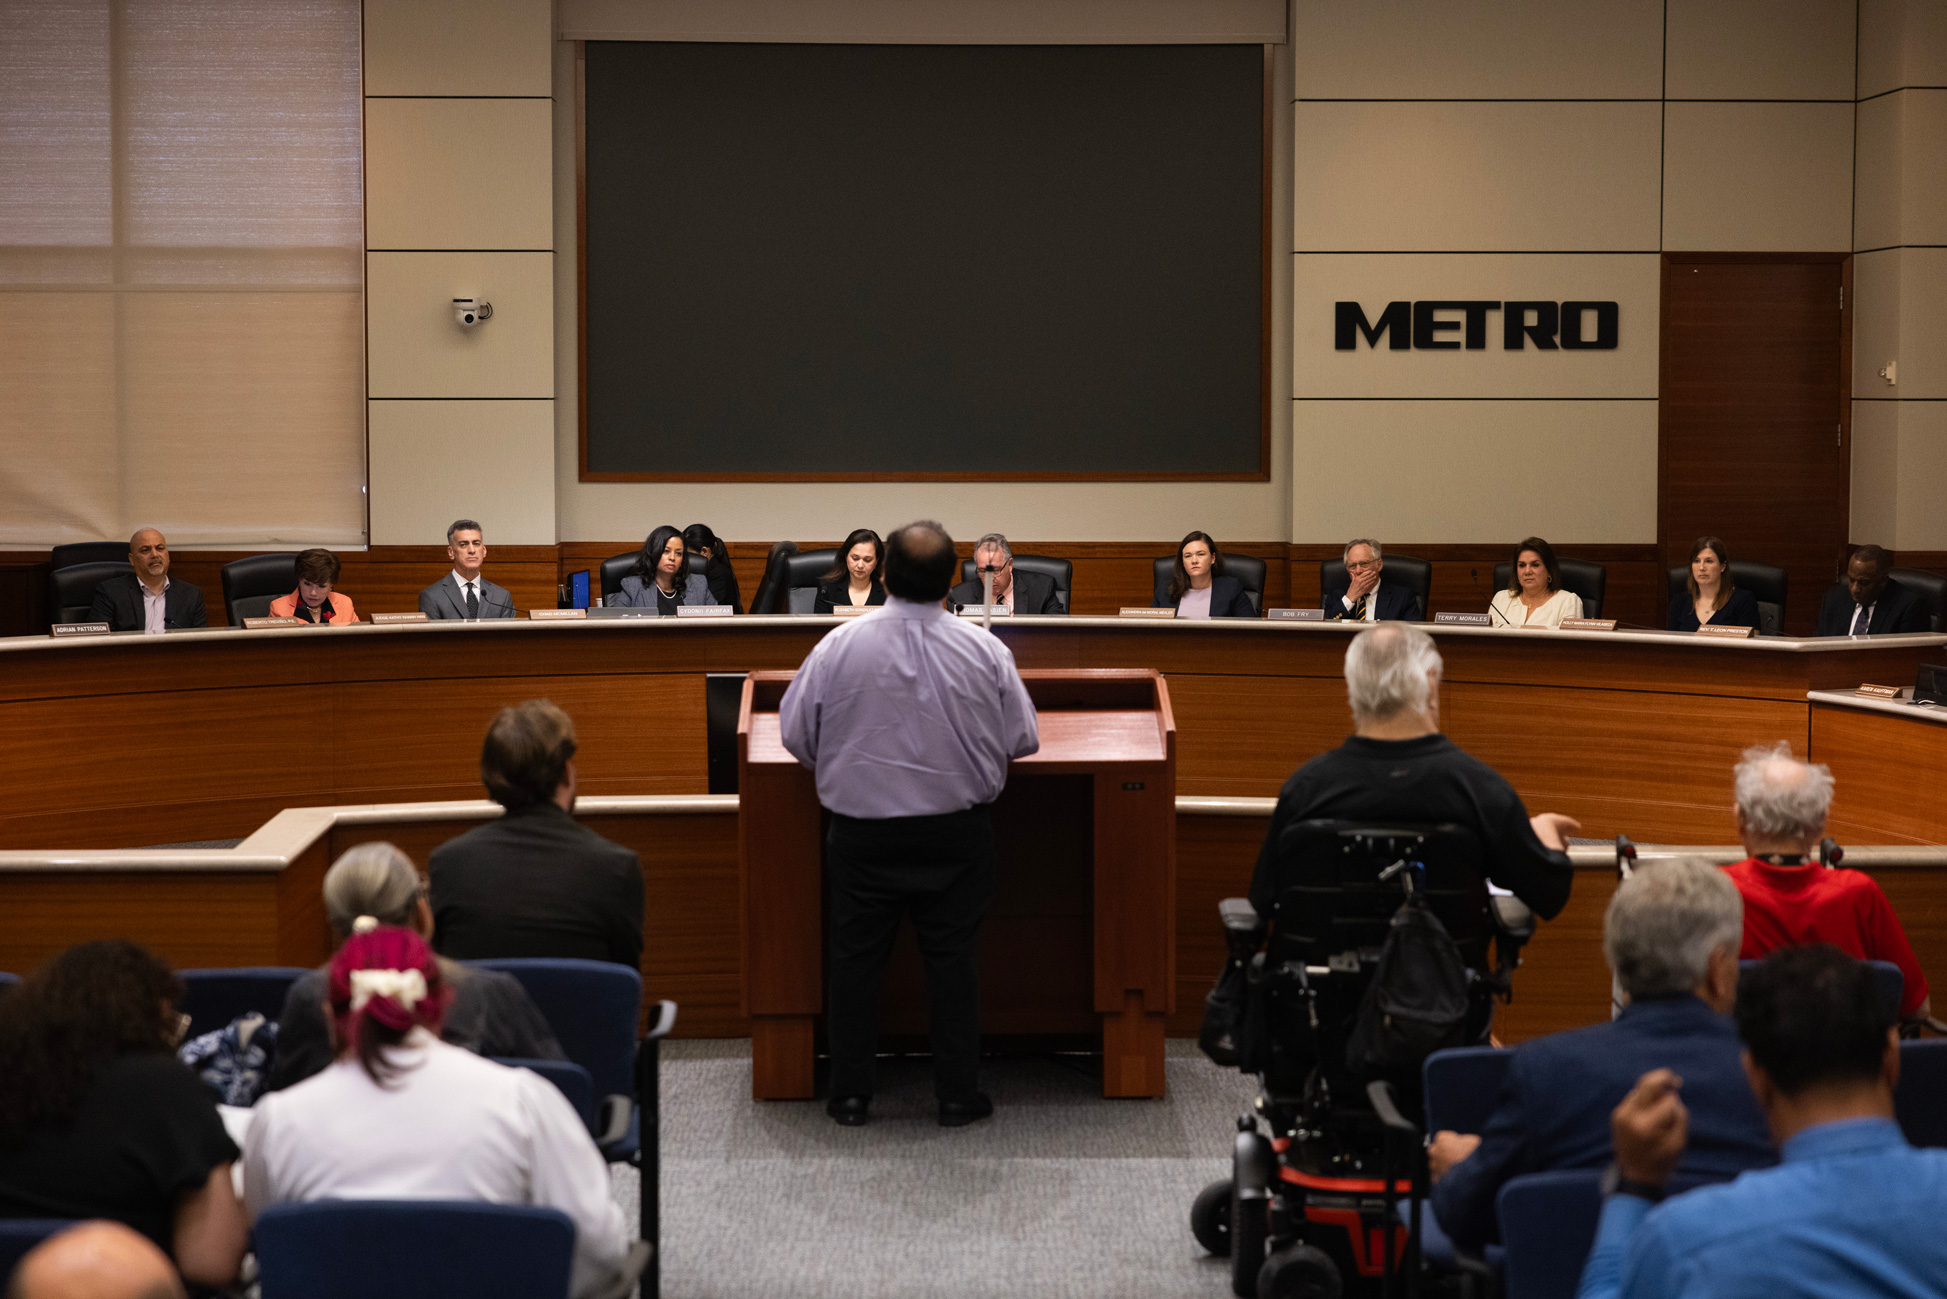 Metro is delaying the University BRT. What about the $3.5B in bonds voters approved in 2019?